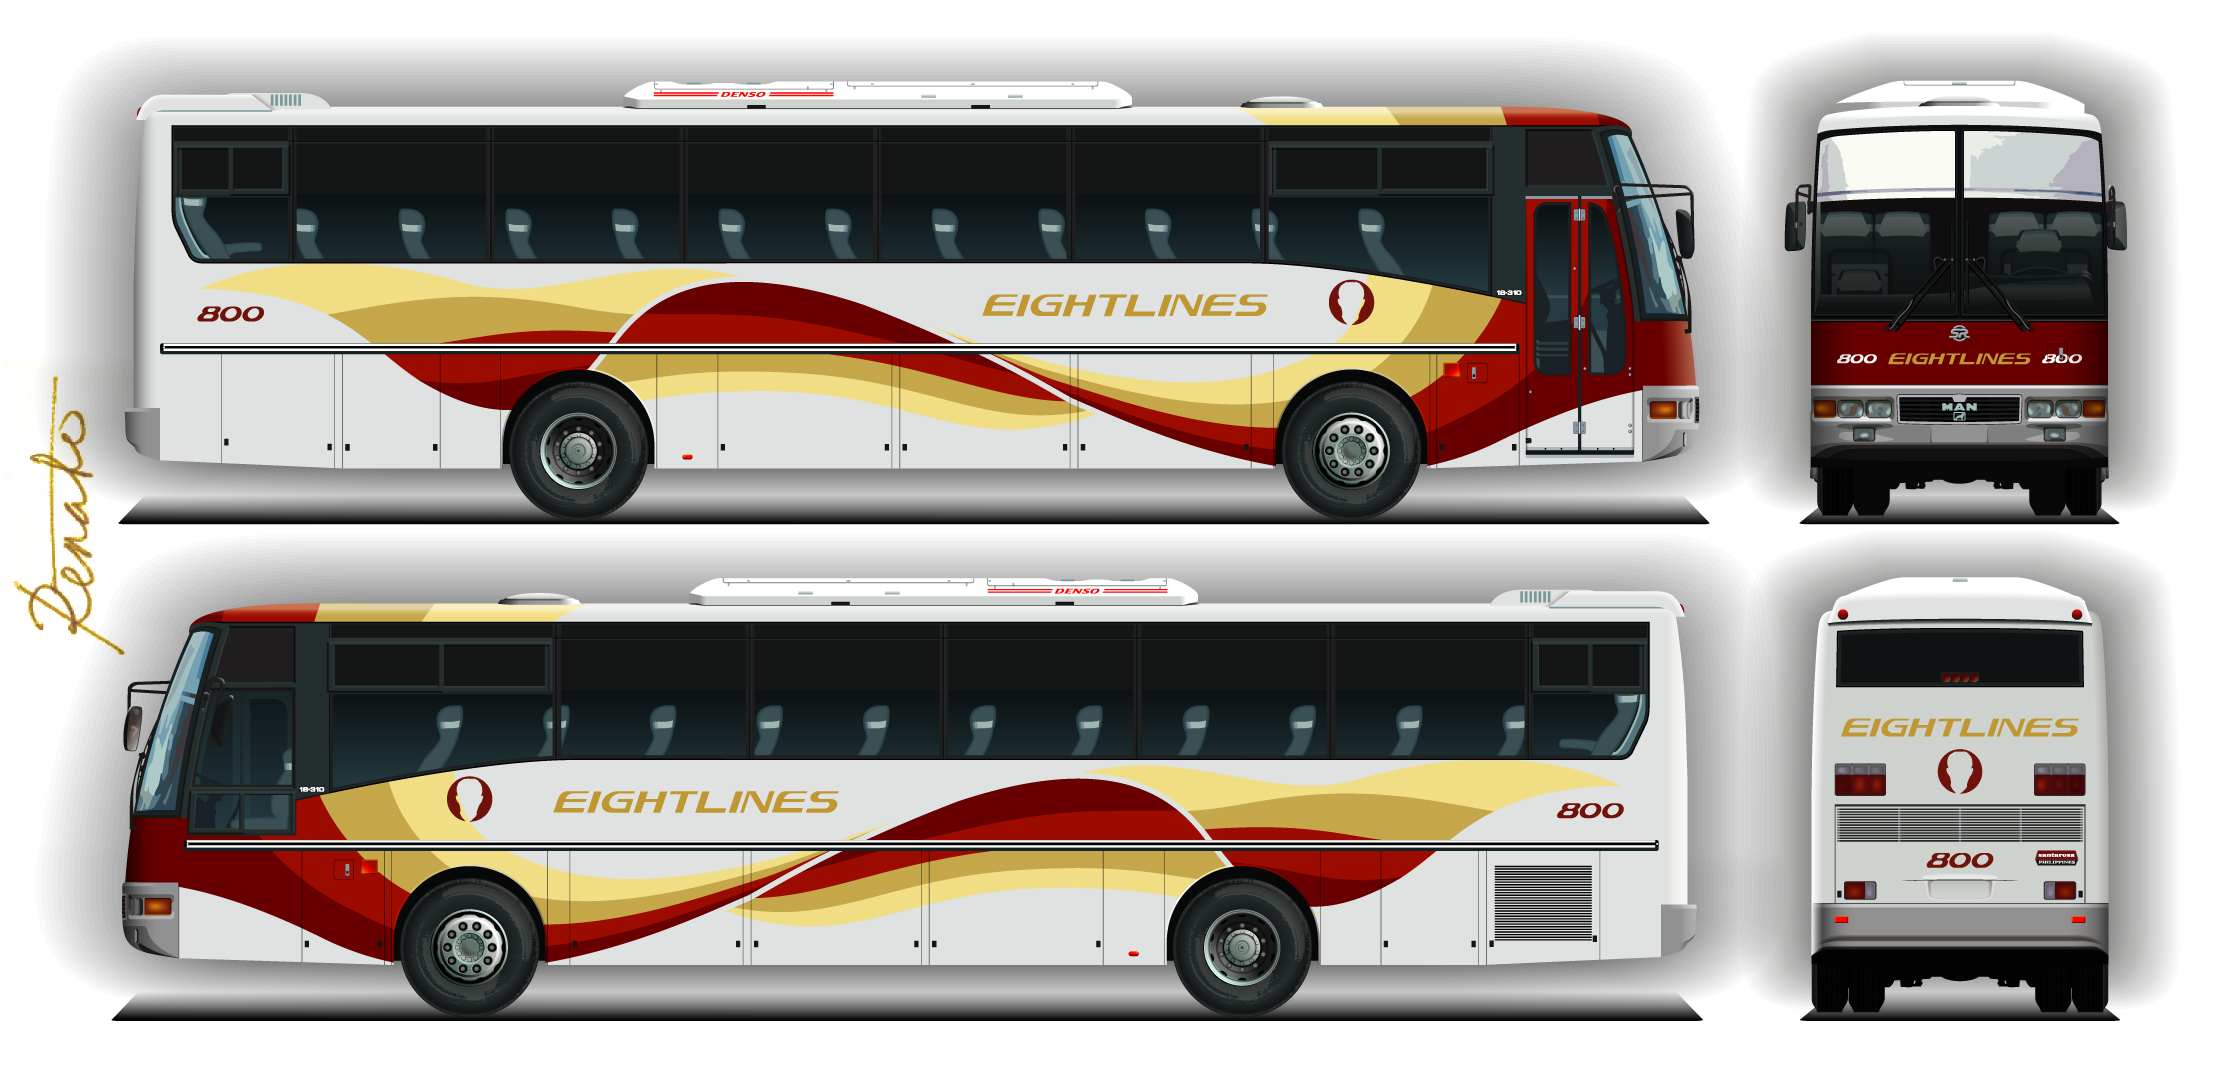 two views of a red and gold bus